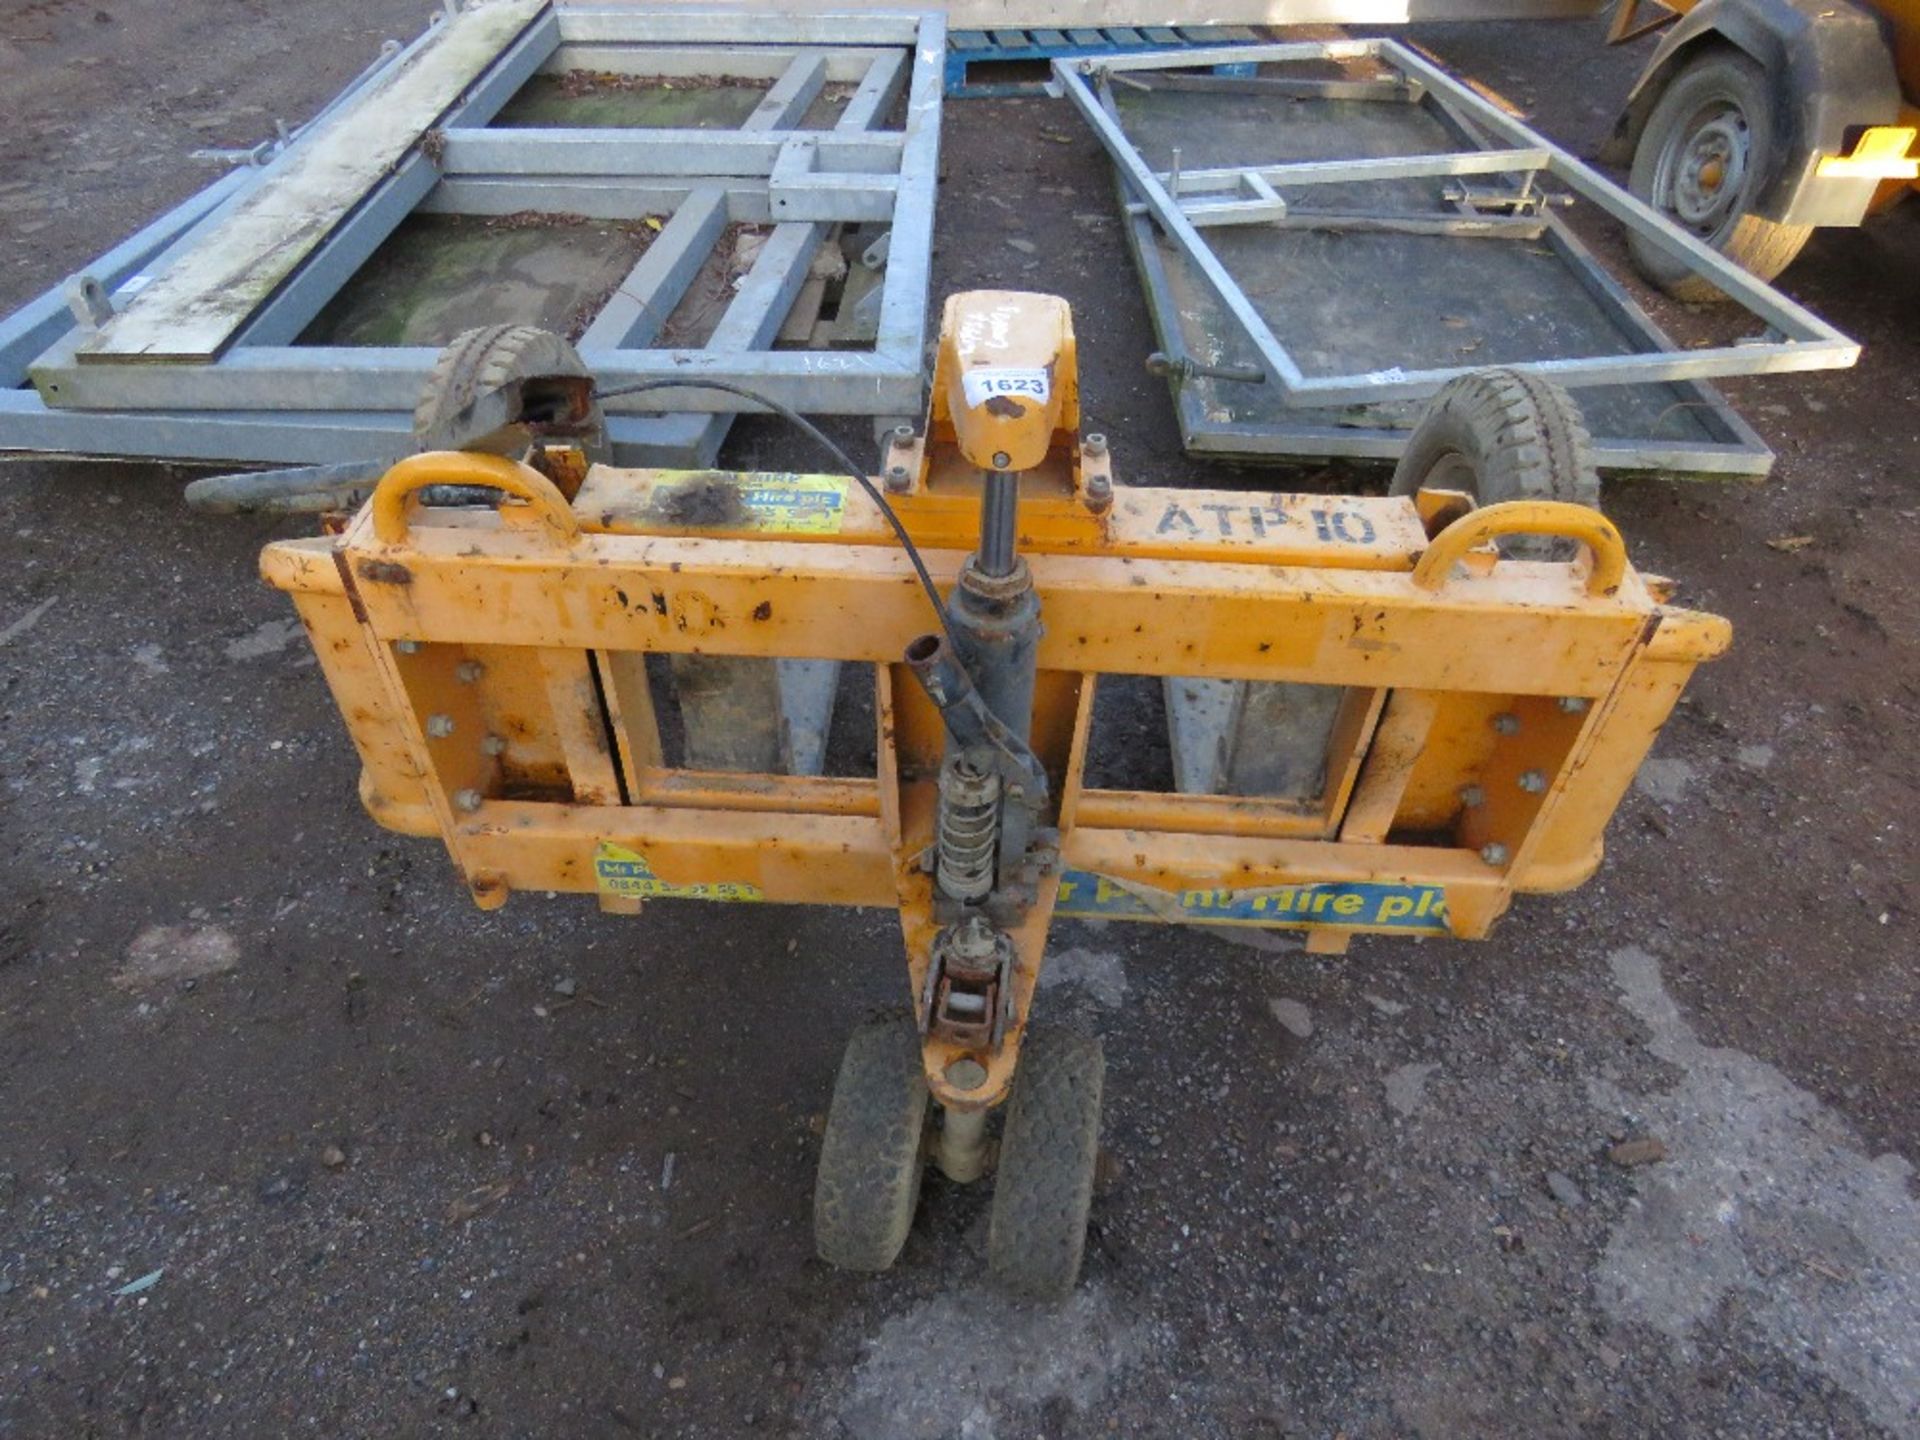 ROUGH TERRAIN PALLET TRUCK. WHEN TESTED WAS SEEN TO LIFT AND LOWER, HANDLE NEEDS REPAIR AS SHOWN. - Image 2 of 3